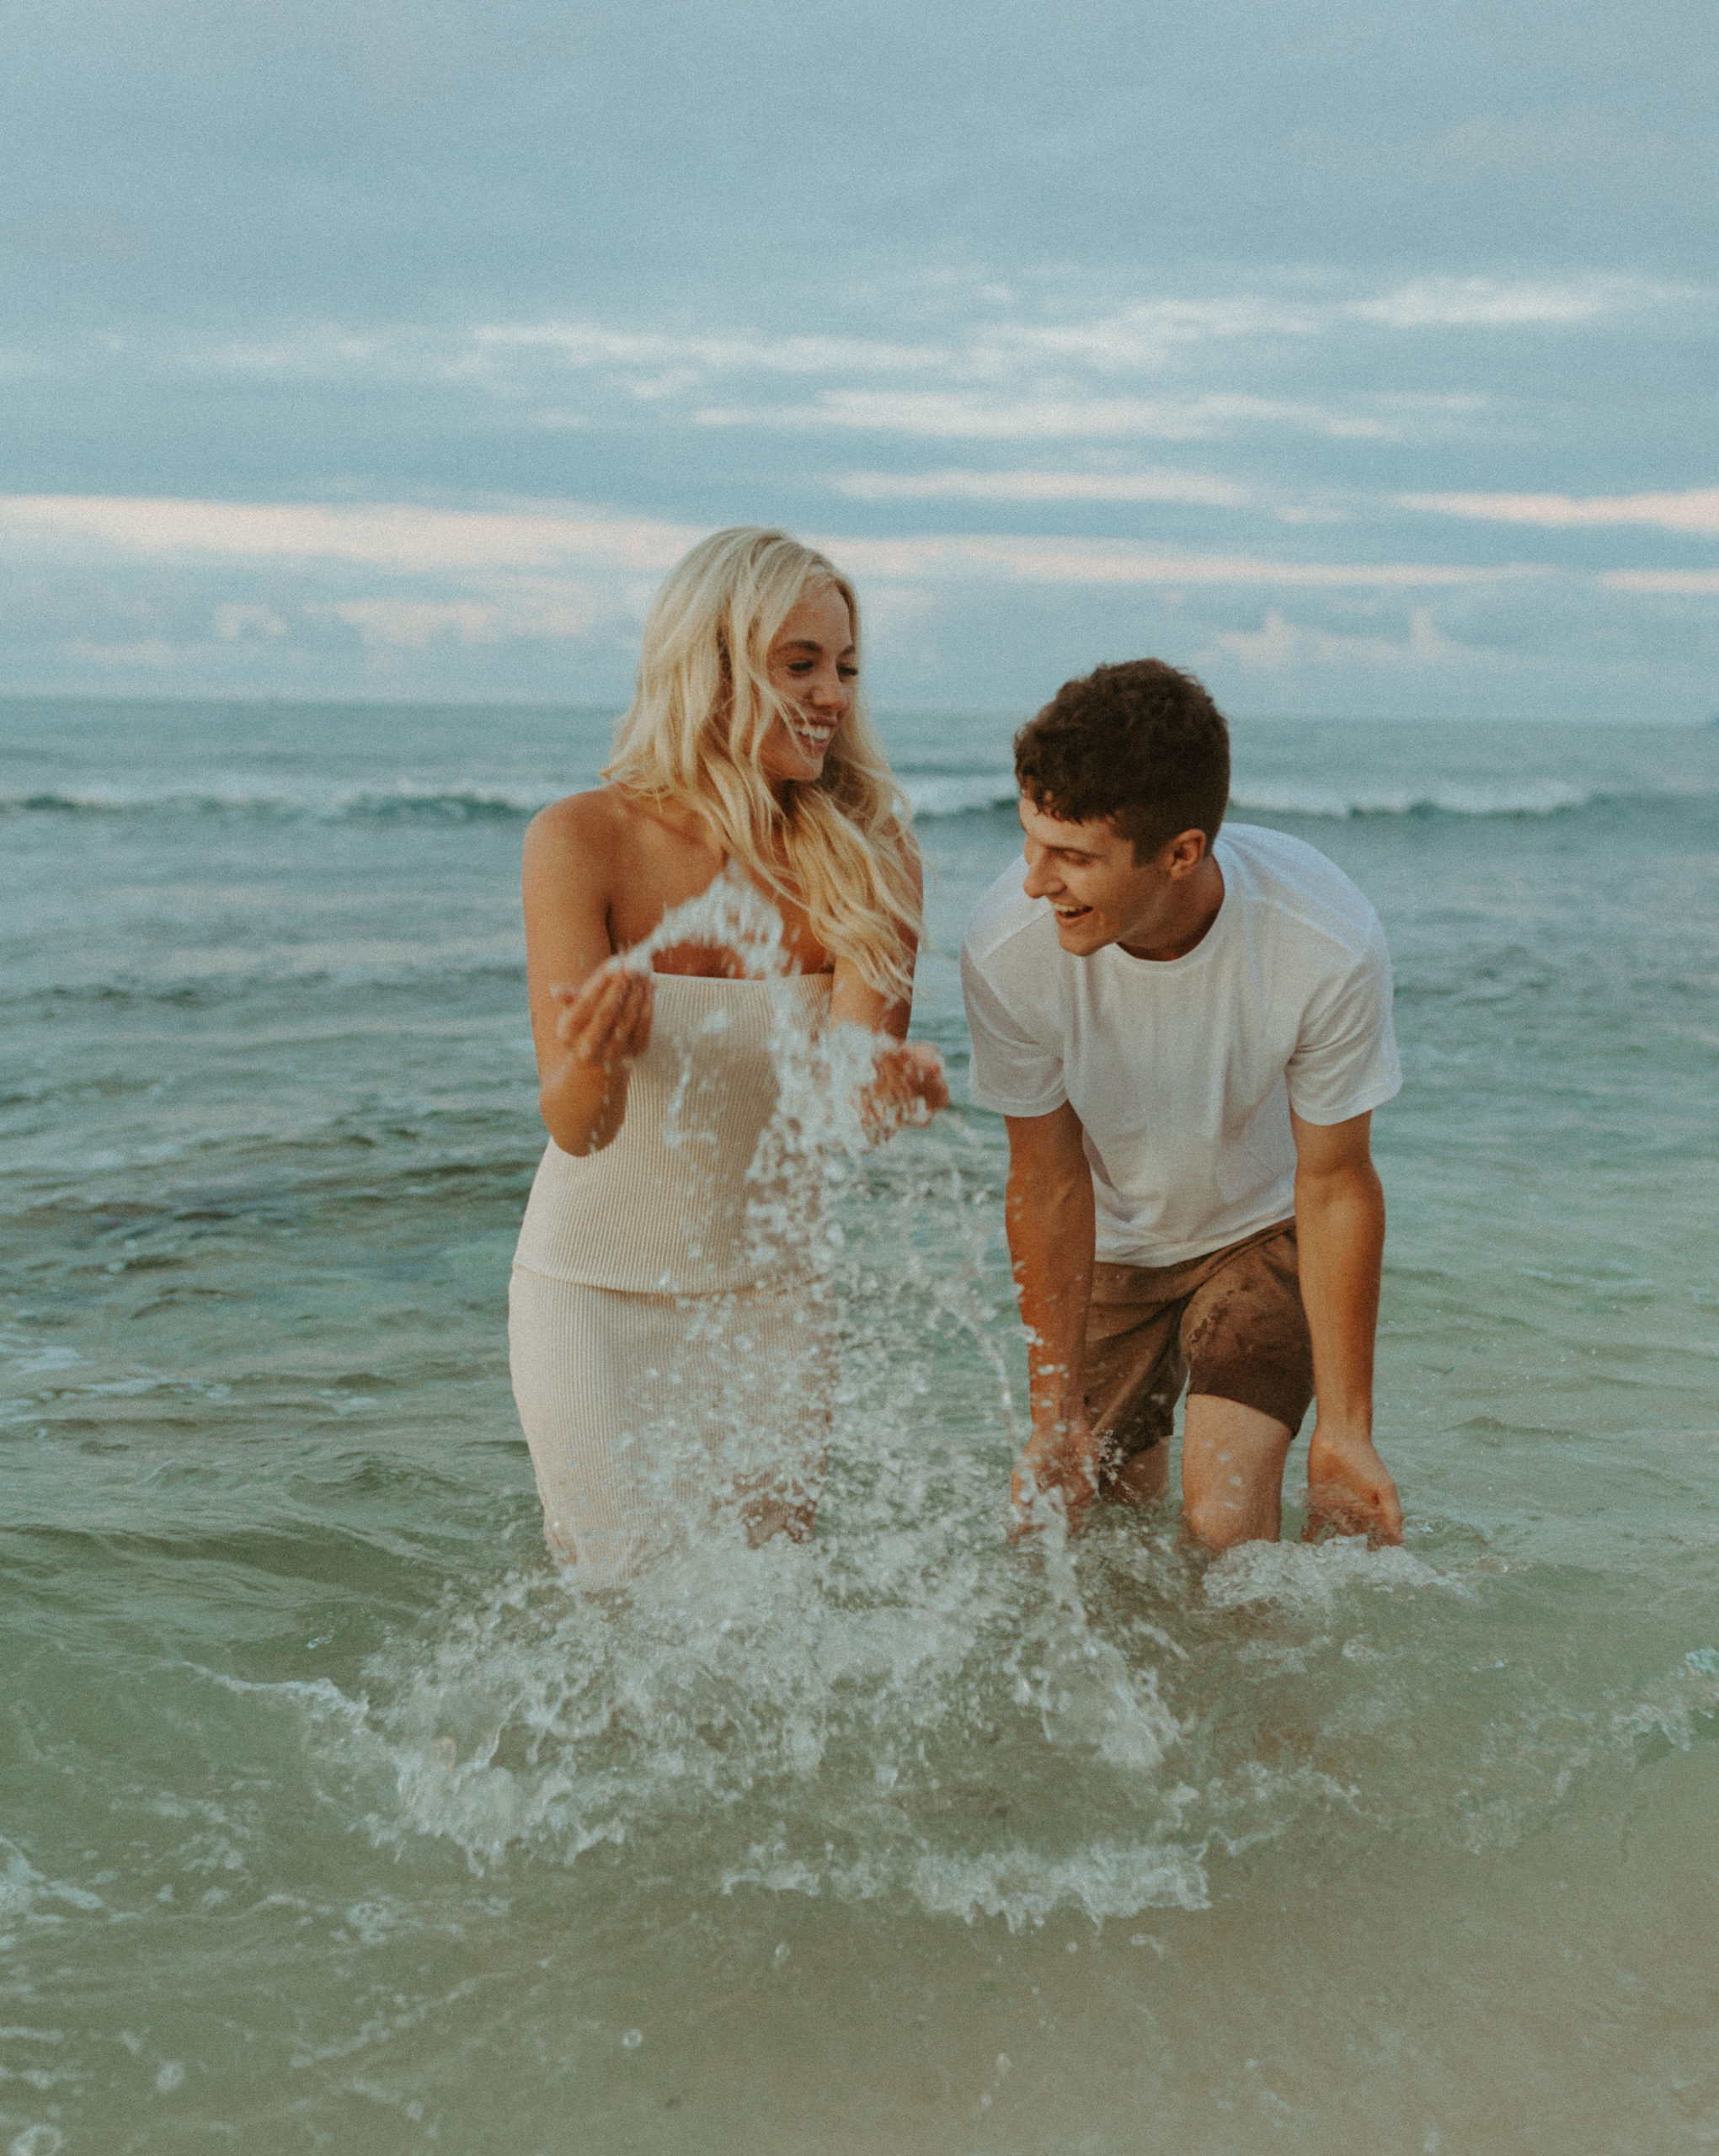 the couple splashing in the water